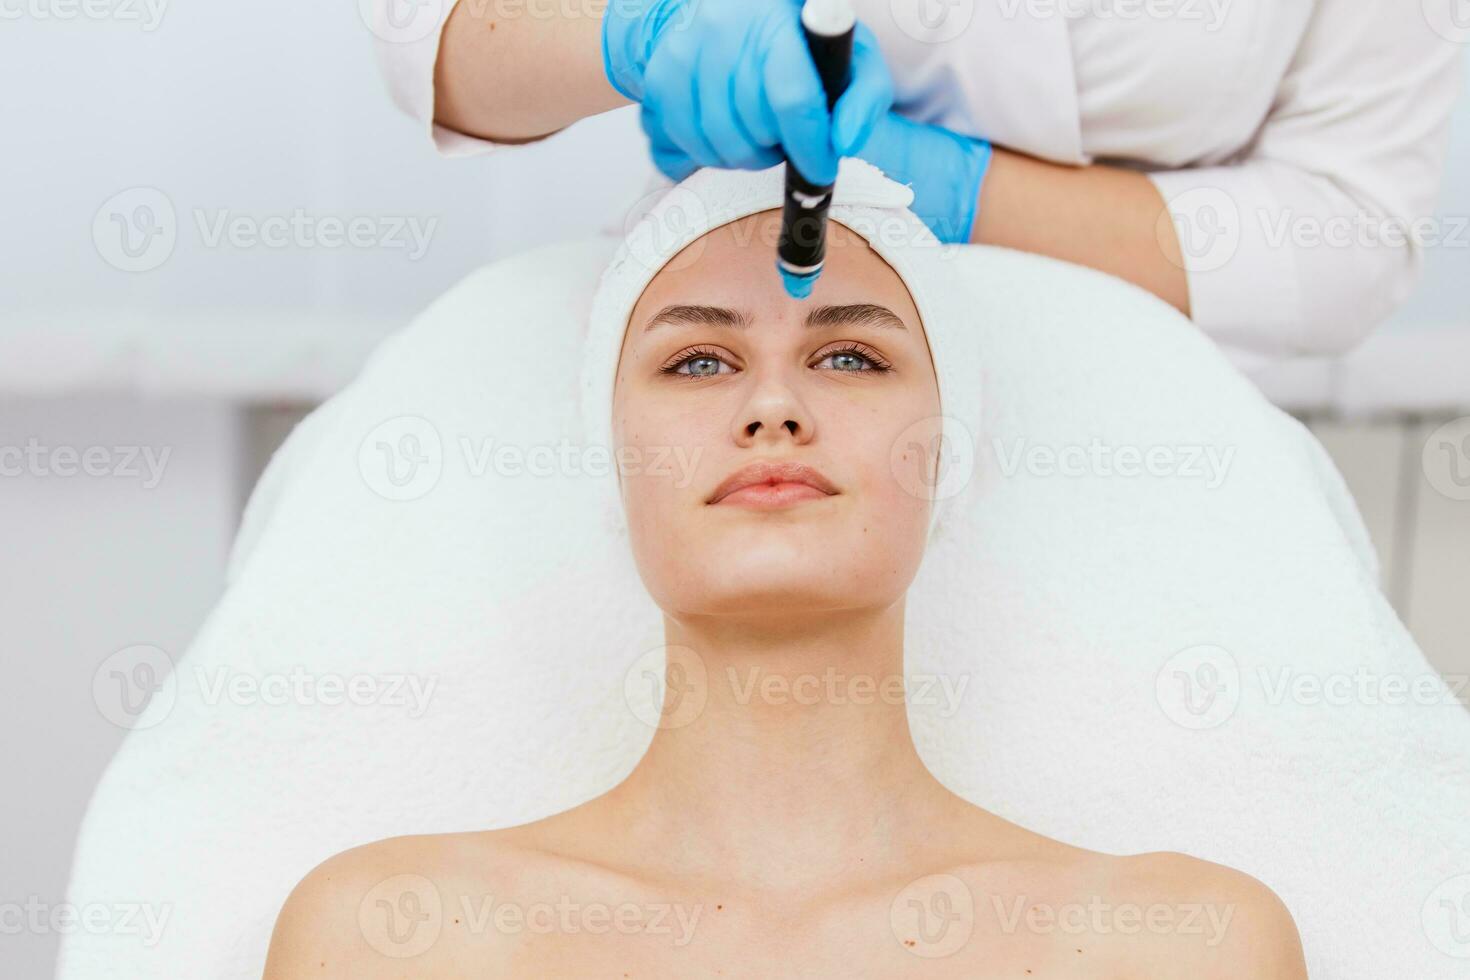 Face Skin Care. Close-up Of Woman Getting Facial Hydro Microdermabrasion Peeling Treatment At Cosmetic Beauty Spa Clinic. Hydra Vacuum Cleaner. Exfoliation, Rejuvenation And Hydratation. Cosmetology. photo